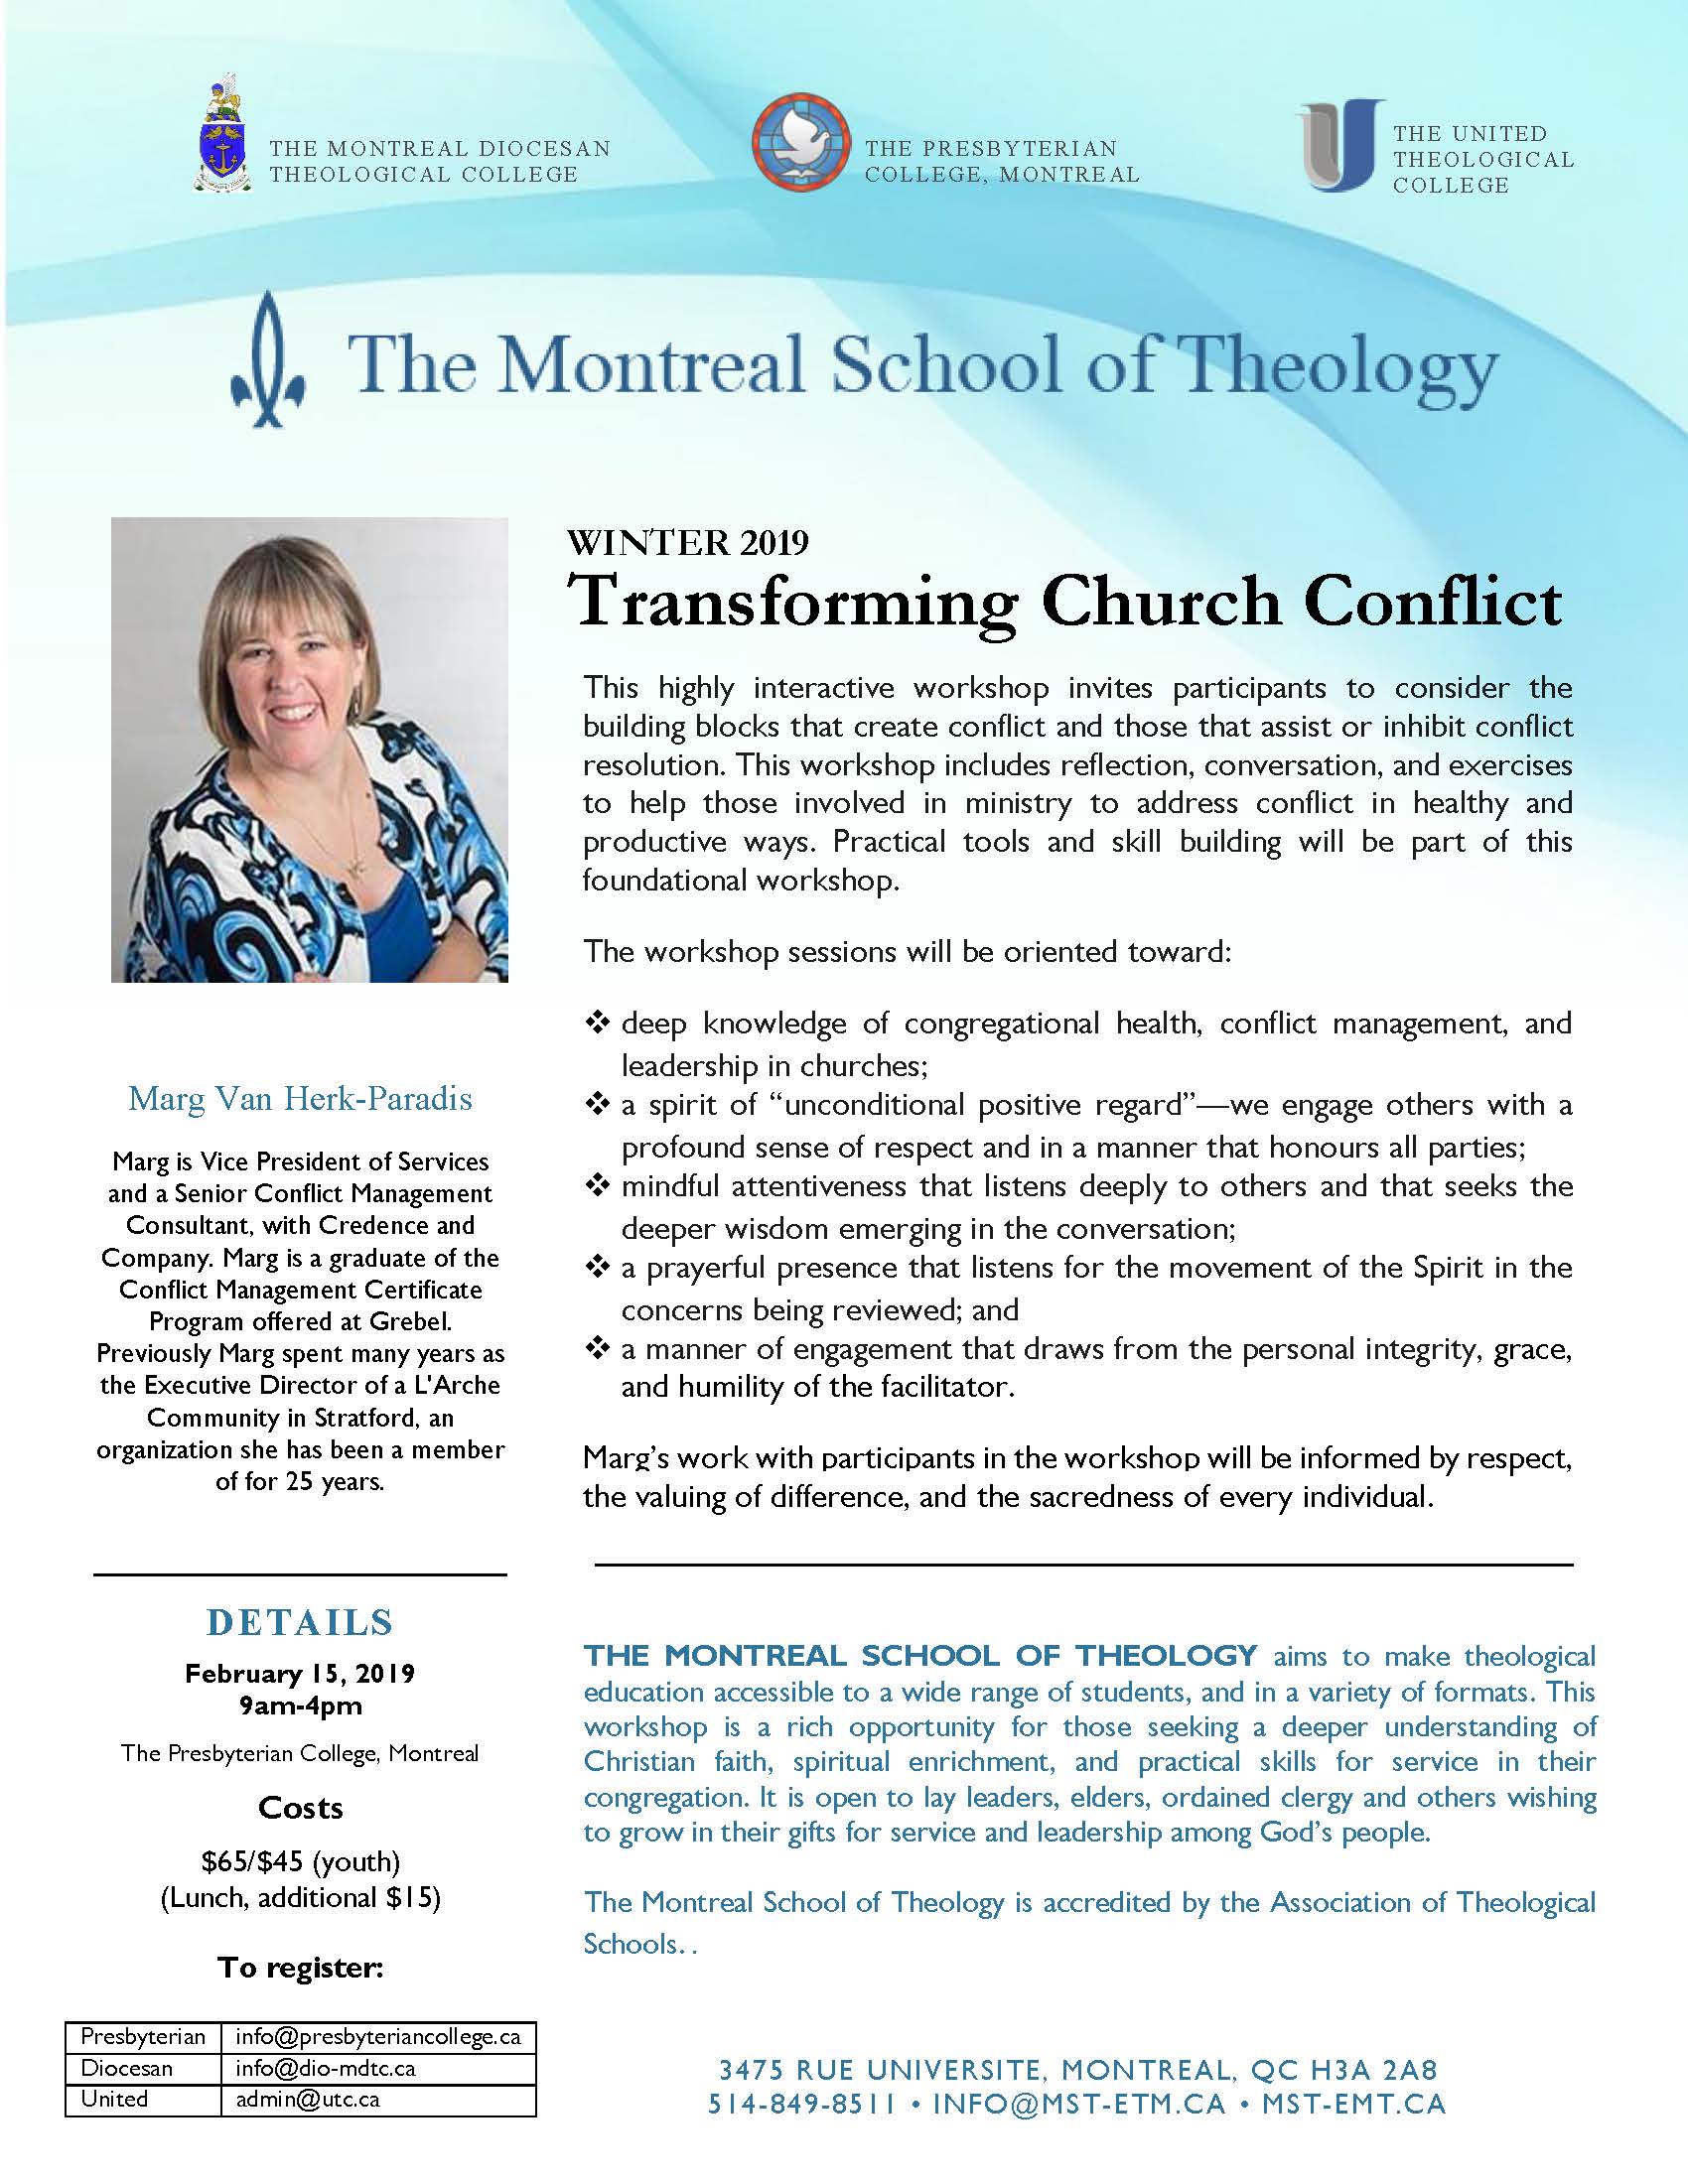 Winter 2019 Workshop : Transforming Church Conflict